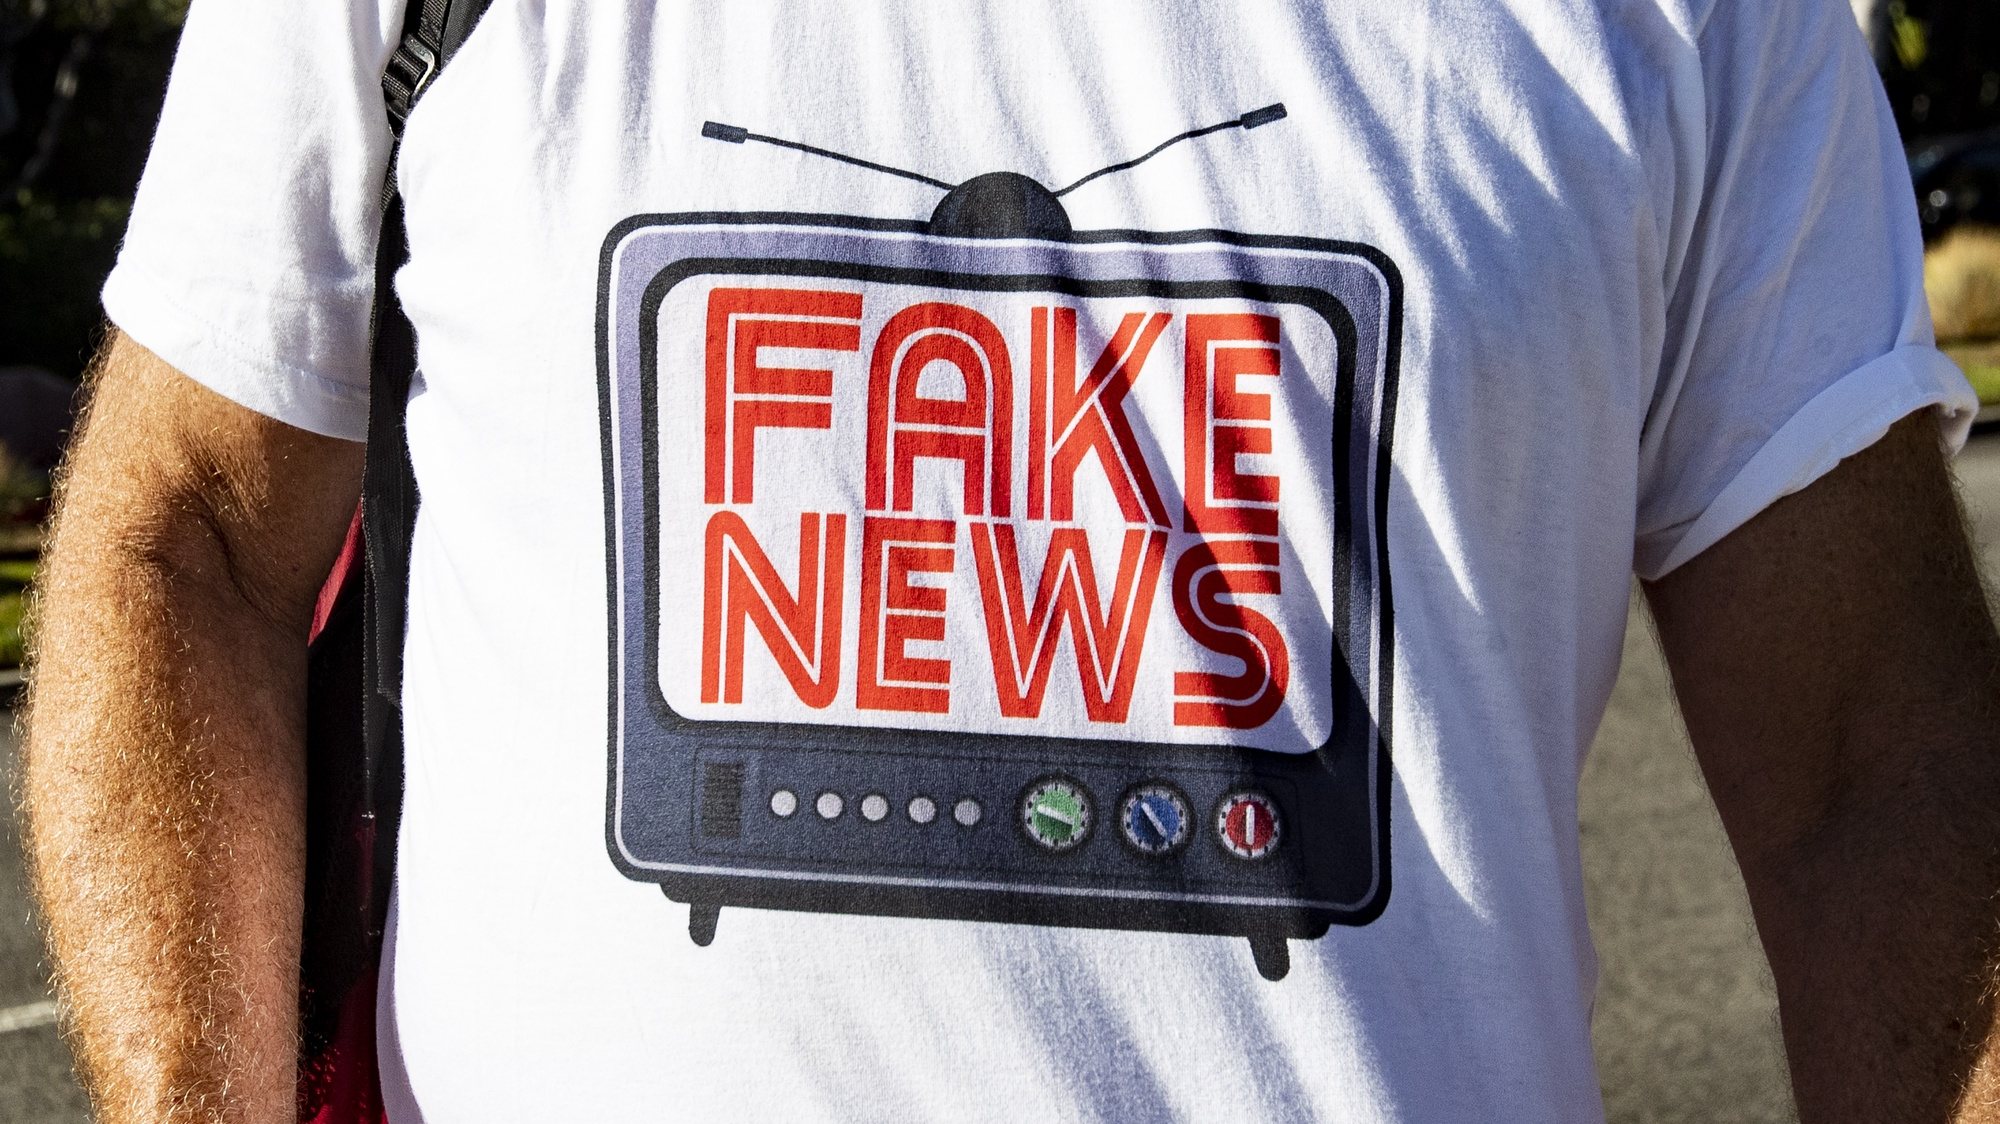 epa07849841 A Trump supporter wears a t-shirt reading &#039;Fake News&#039; as he waits for the arrival of President Donald Trump in front of the Beverly Hills Hotel in Beverly Hills, California, USA, 17 September 2019. Trump is on a two-day trip to California to raise money for his 2020 election campaign.  EPA/ETIENNE LAURENT